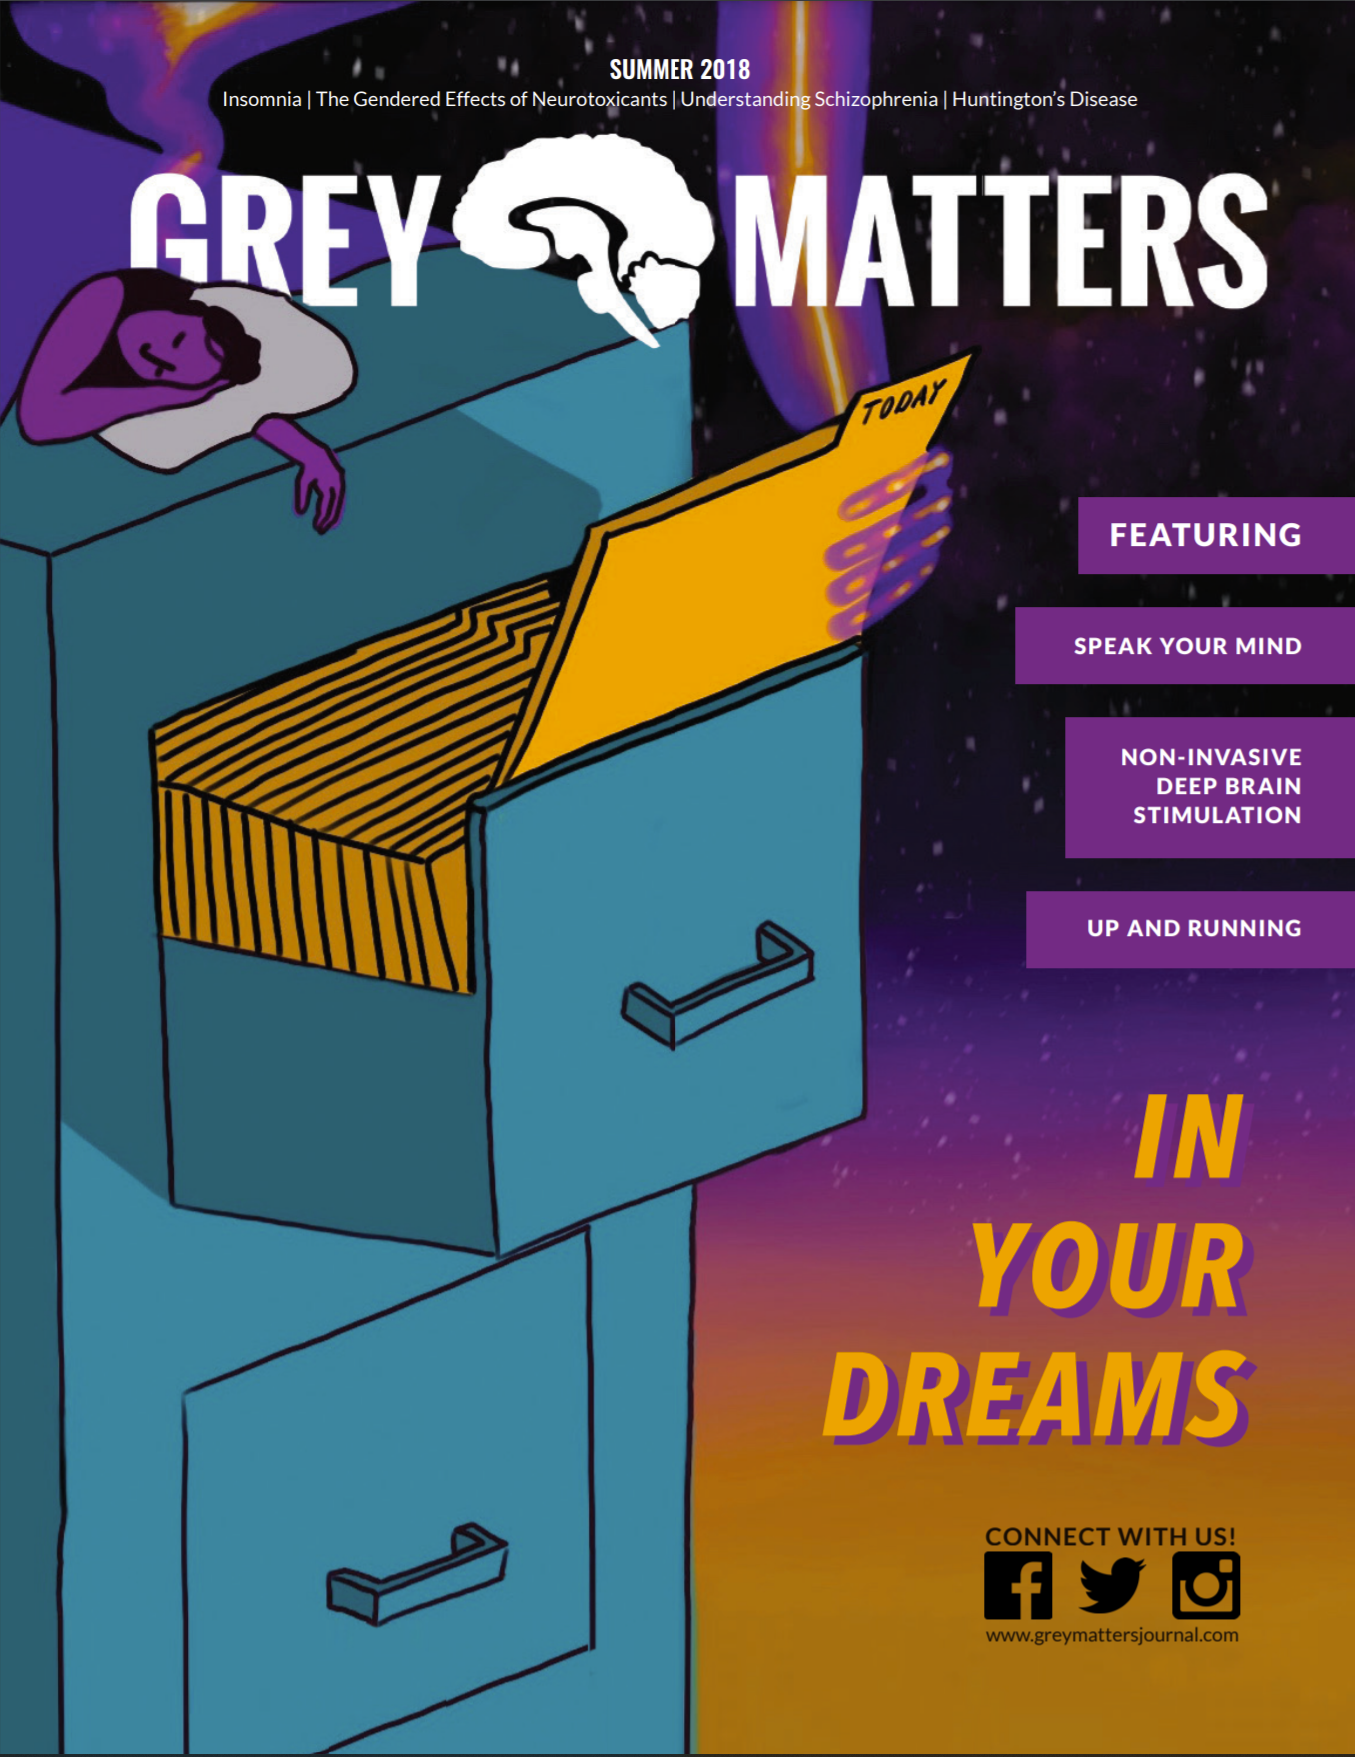 Grey Matters Journal Issue 14